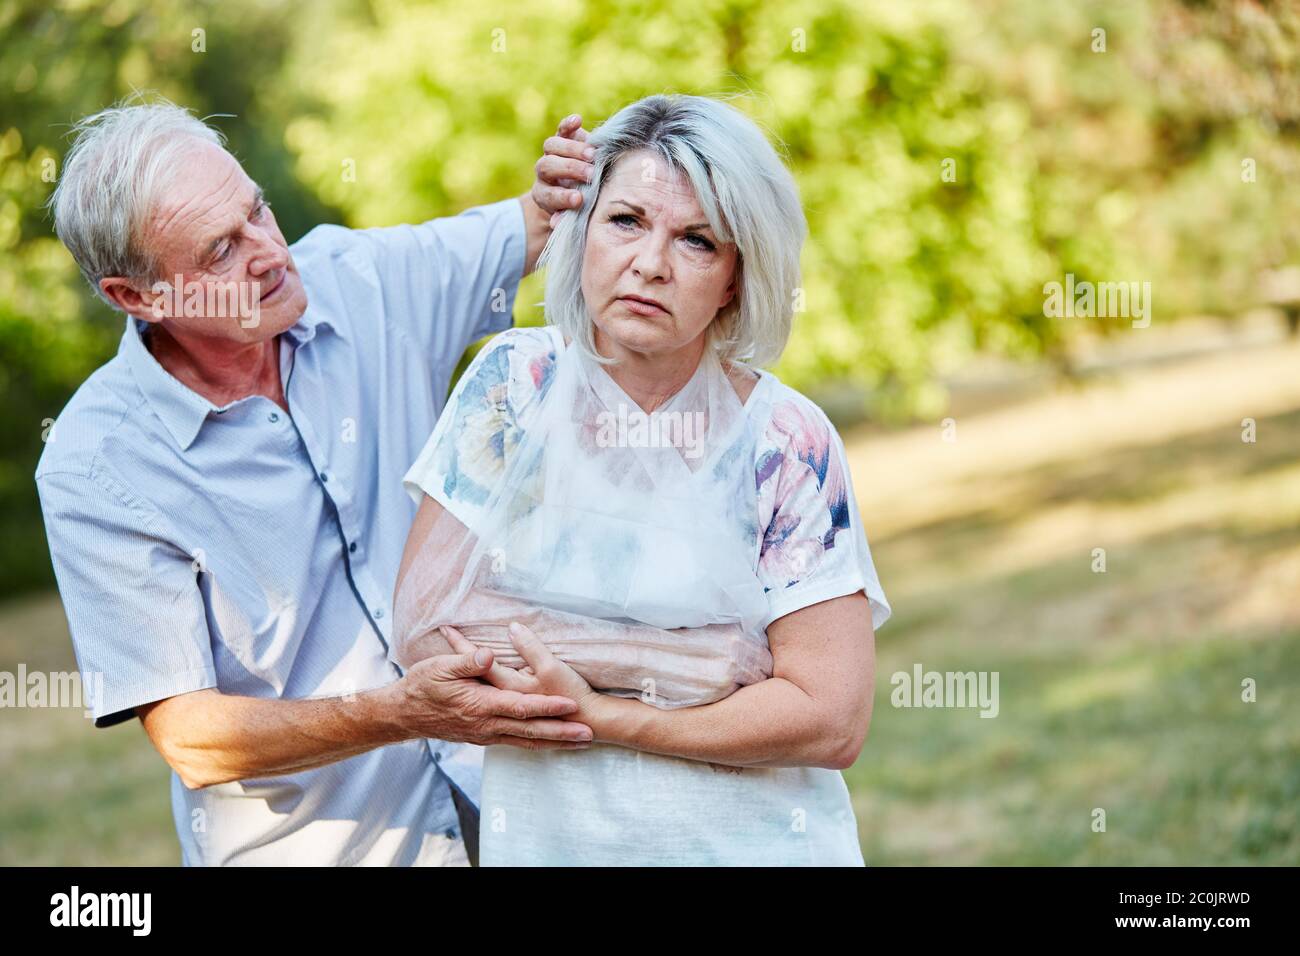 Old woman with a broken arm in a noose in nature Stock Photo